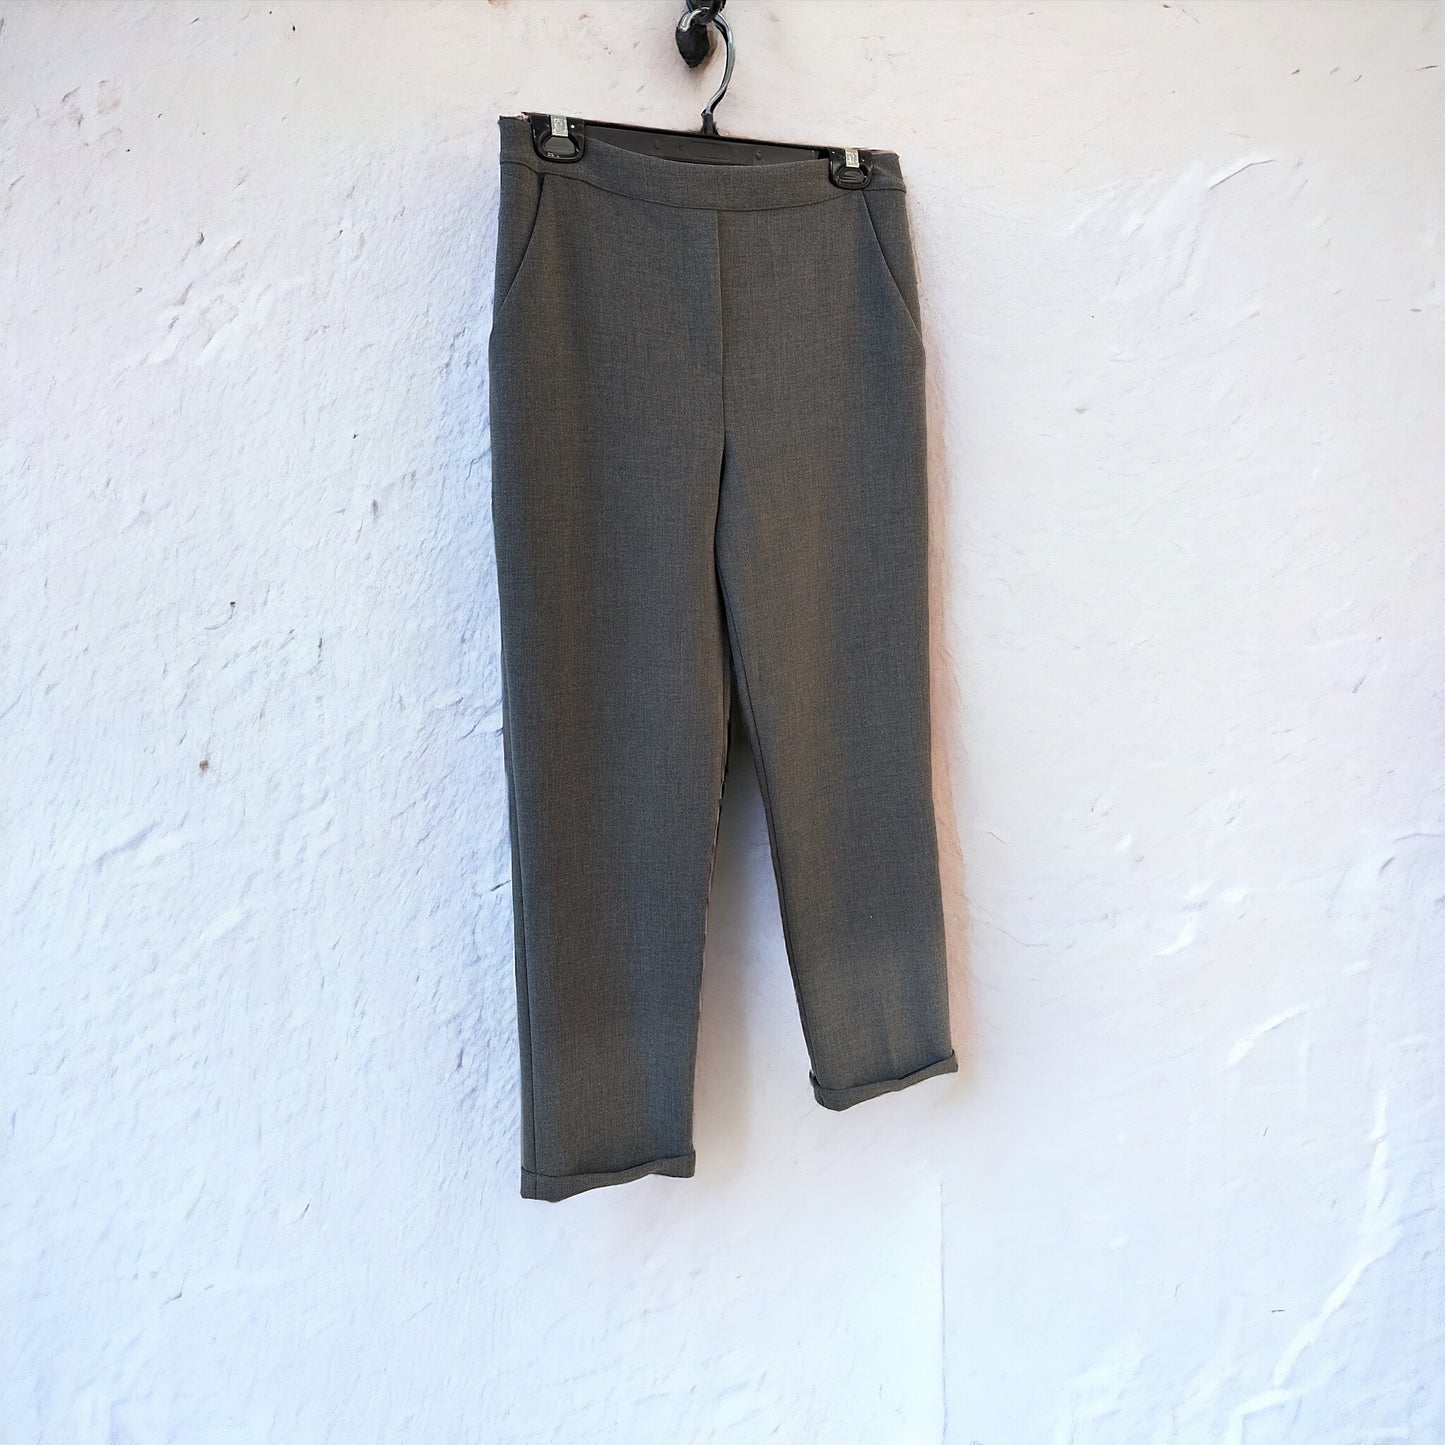 PULL ON CUFFED PANT